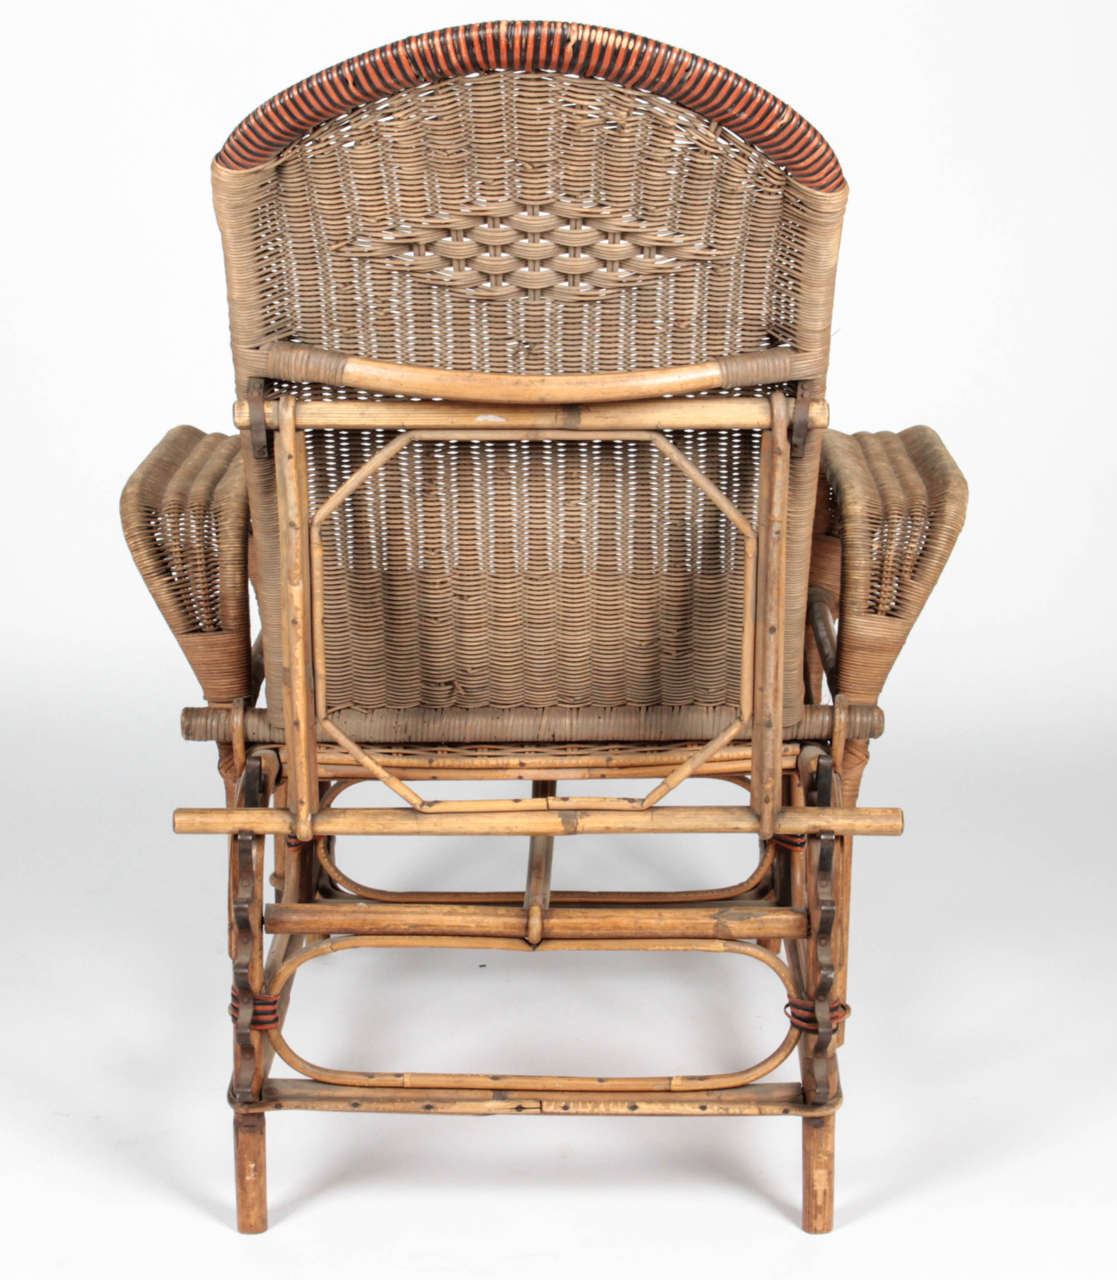 Art Deco Reclining Wicker Lounge Chair with Detachable Foot Rest 1